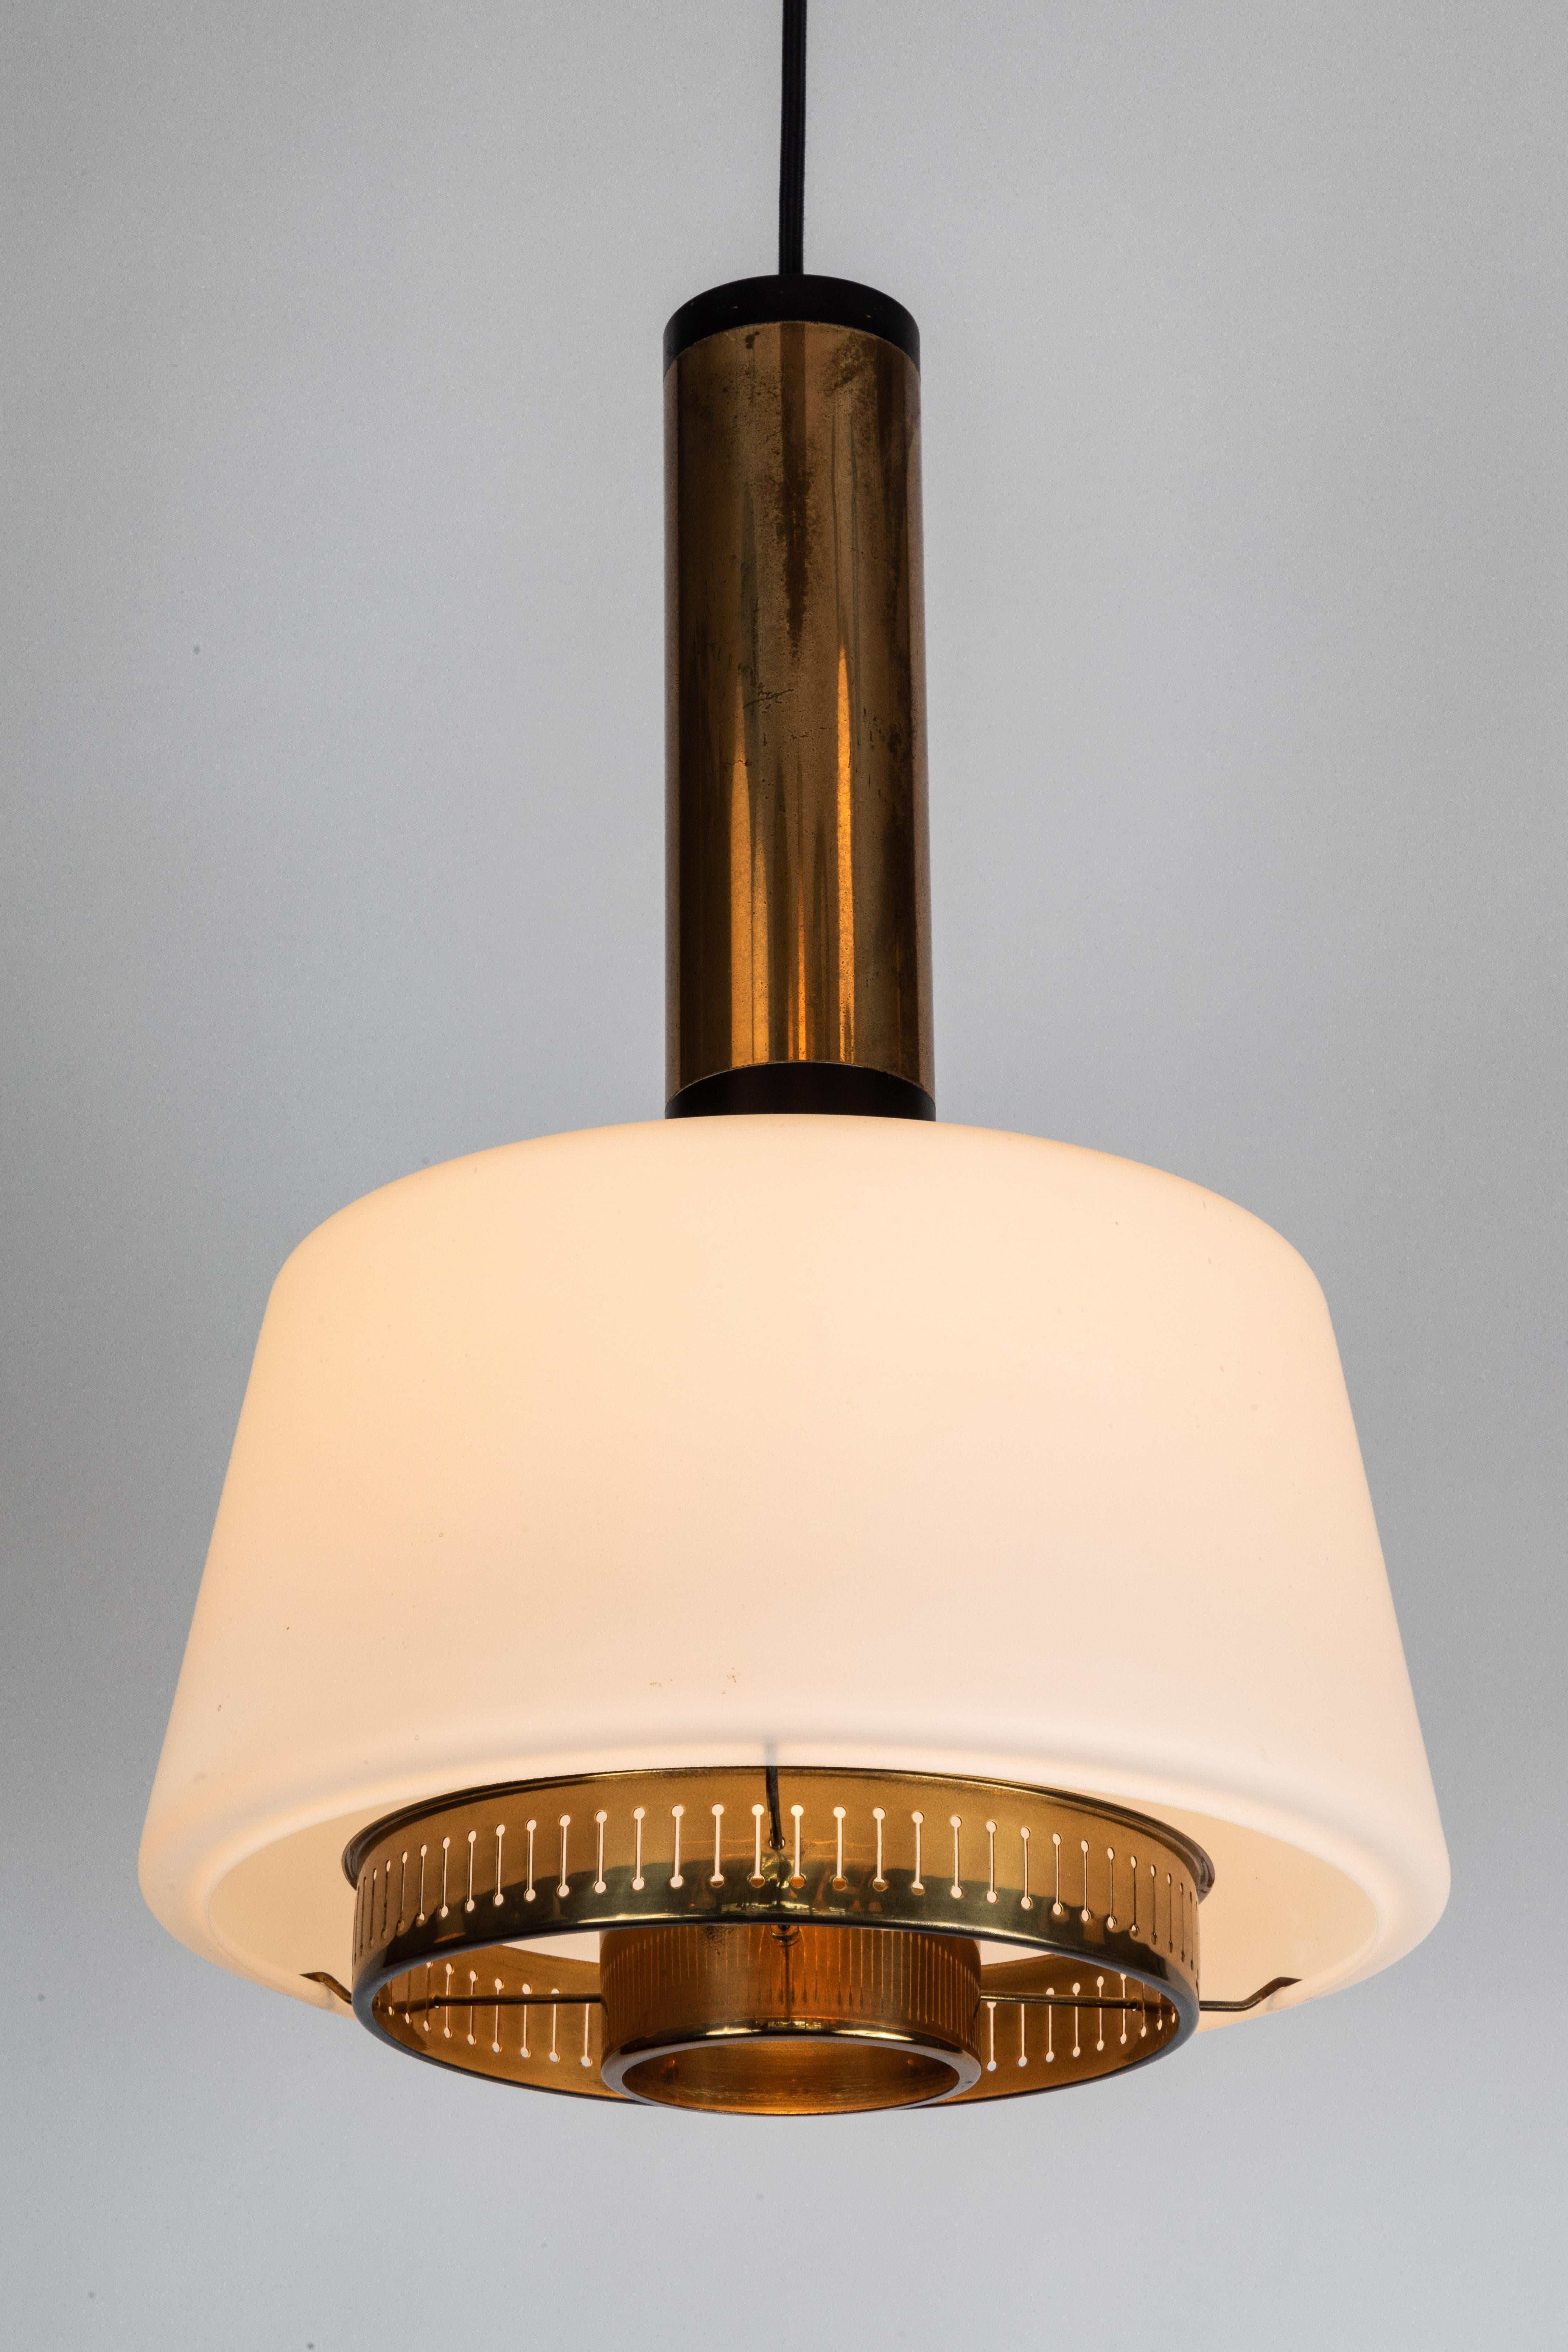 Large 1950s Stilnovo Model #1192 brass and glass pendant. A quintessentially 1950s Italian design executed in matte finish opaline glass and brass with a custom fabricated architectural ceiling canopy for mounting over a standard American J-box. A